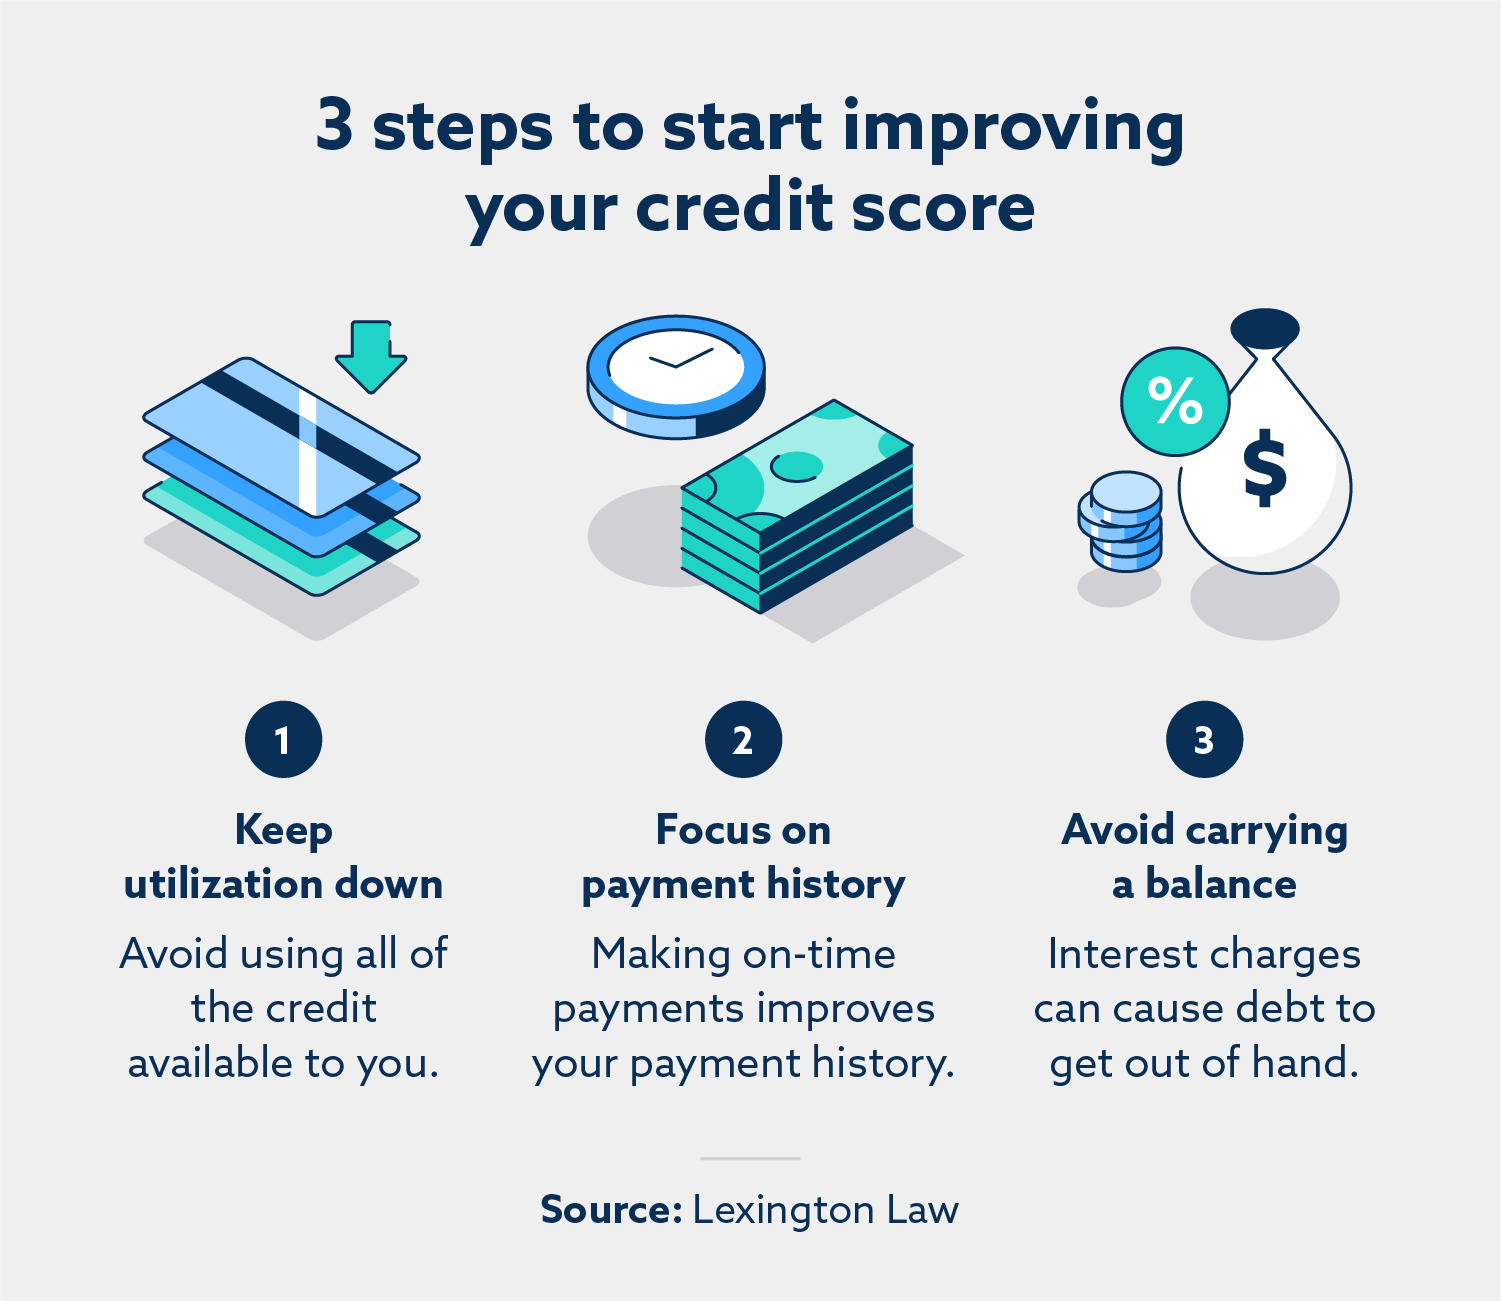 3 steps to start improving your credit score